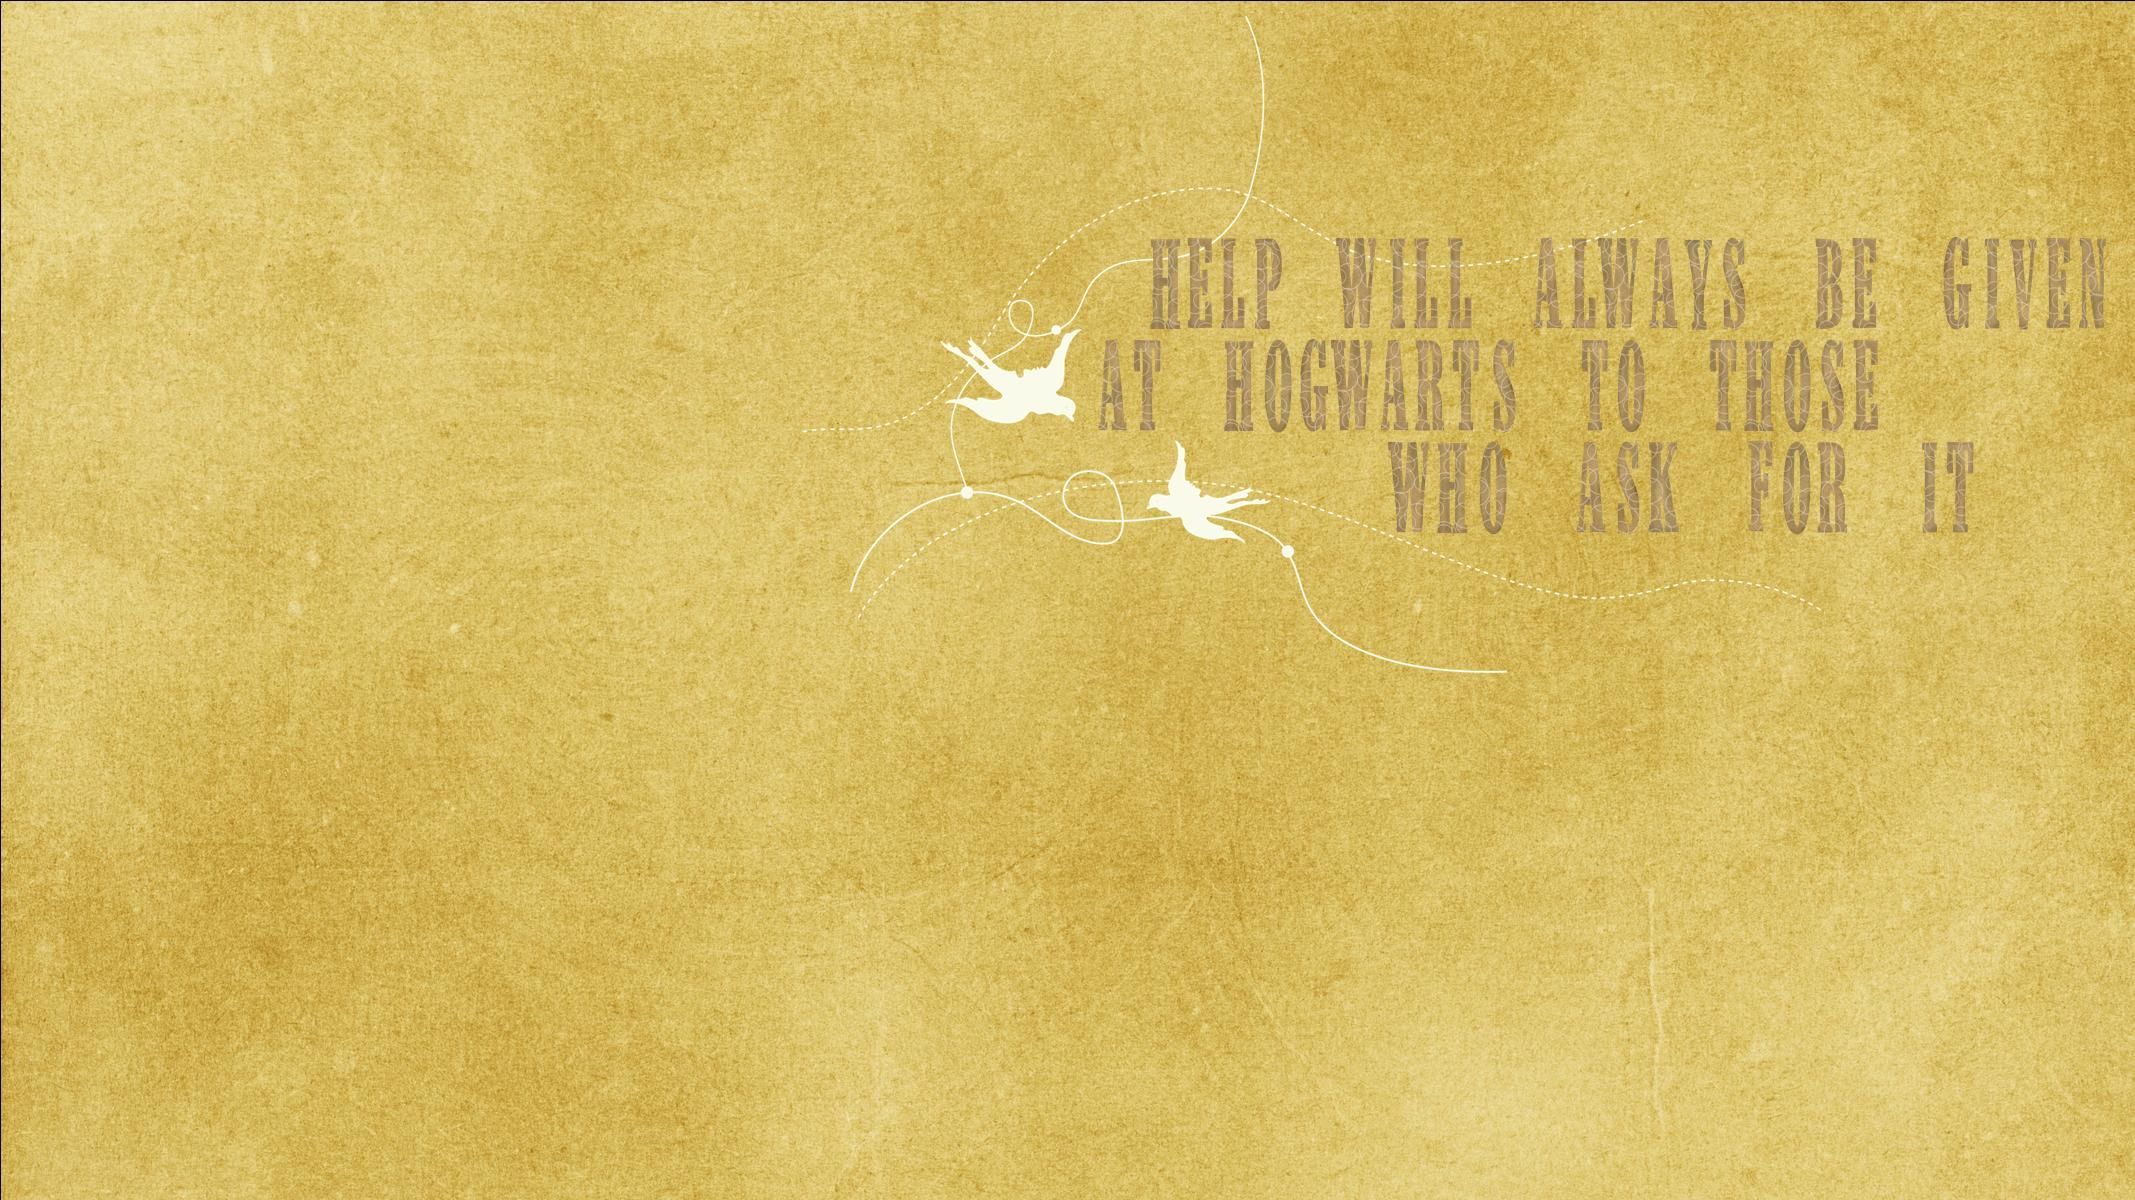 Help will always be given at Hogwarts those those who ask for it